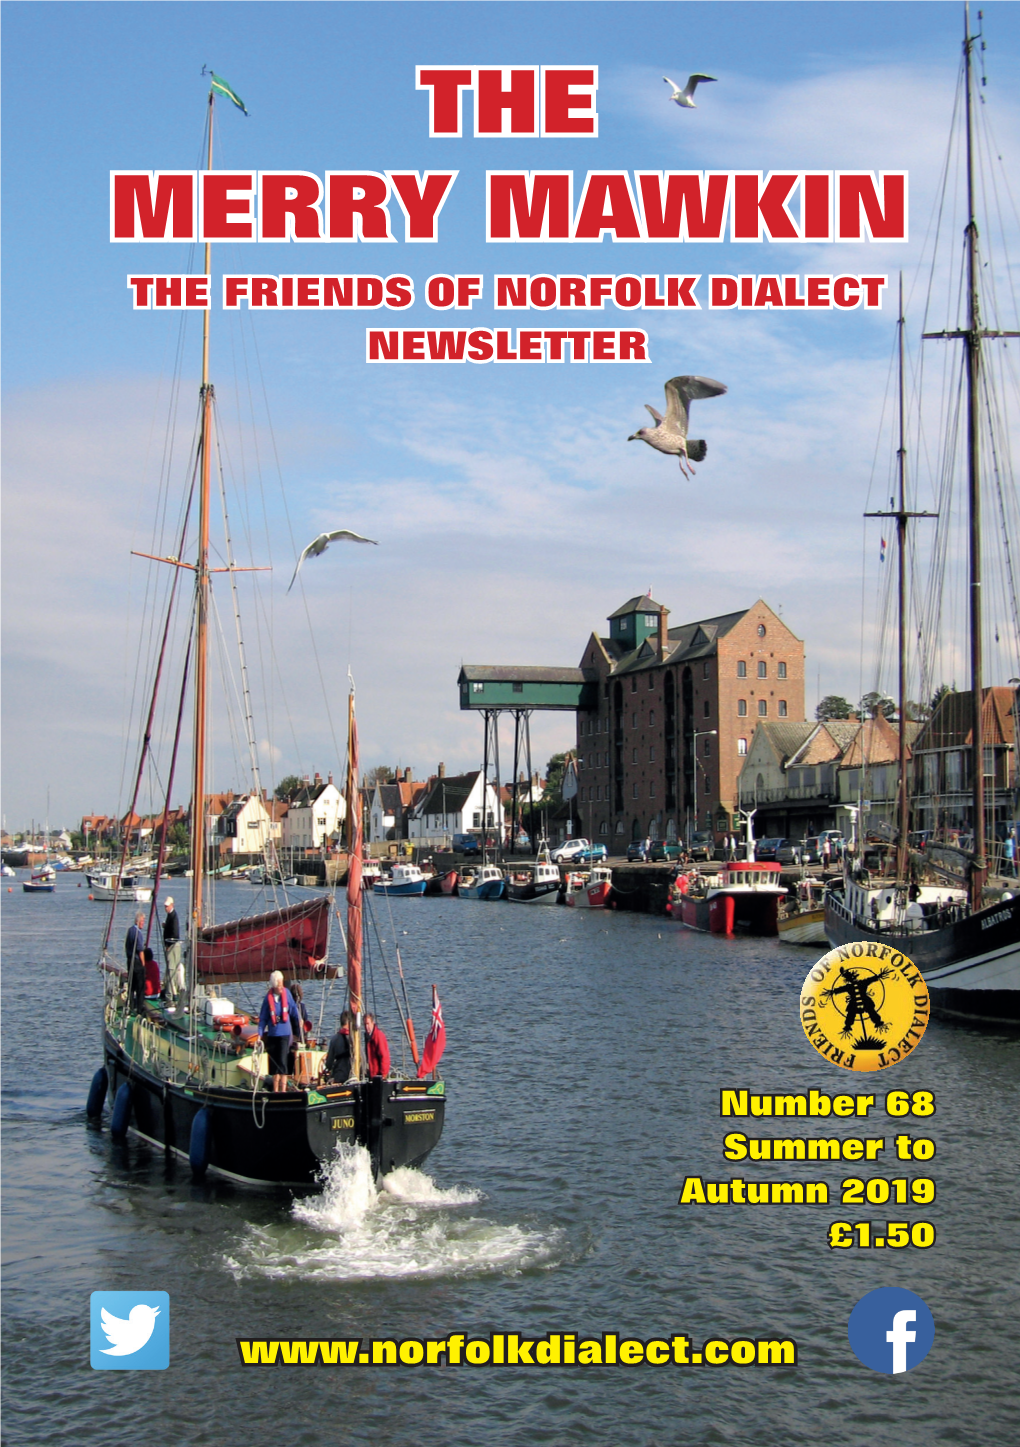 The Merry Mawkin the Friends of Norfolk Dialect Newsletter